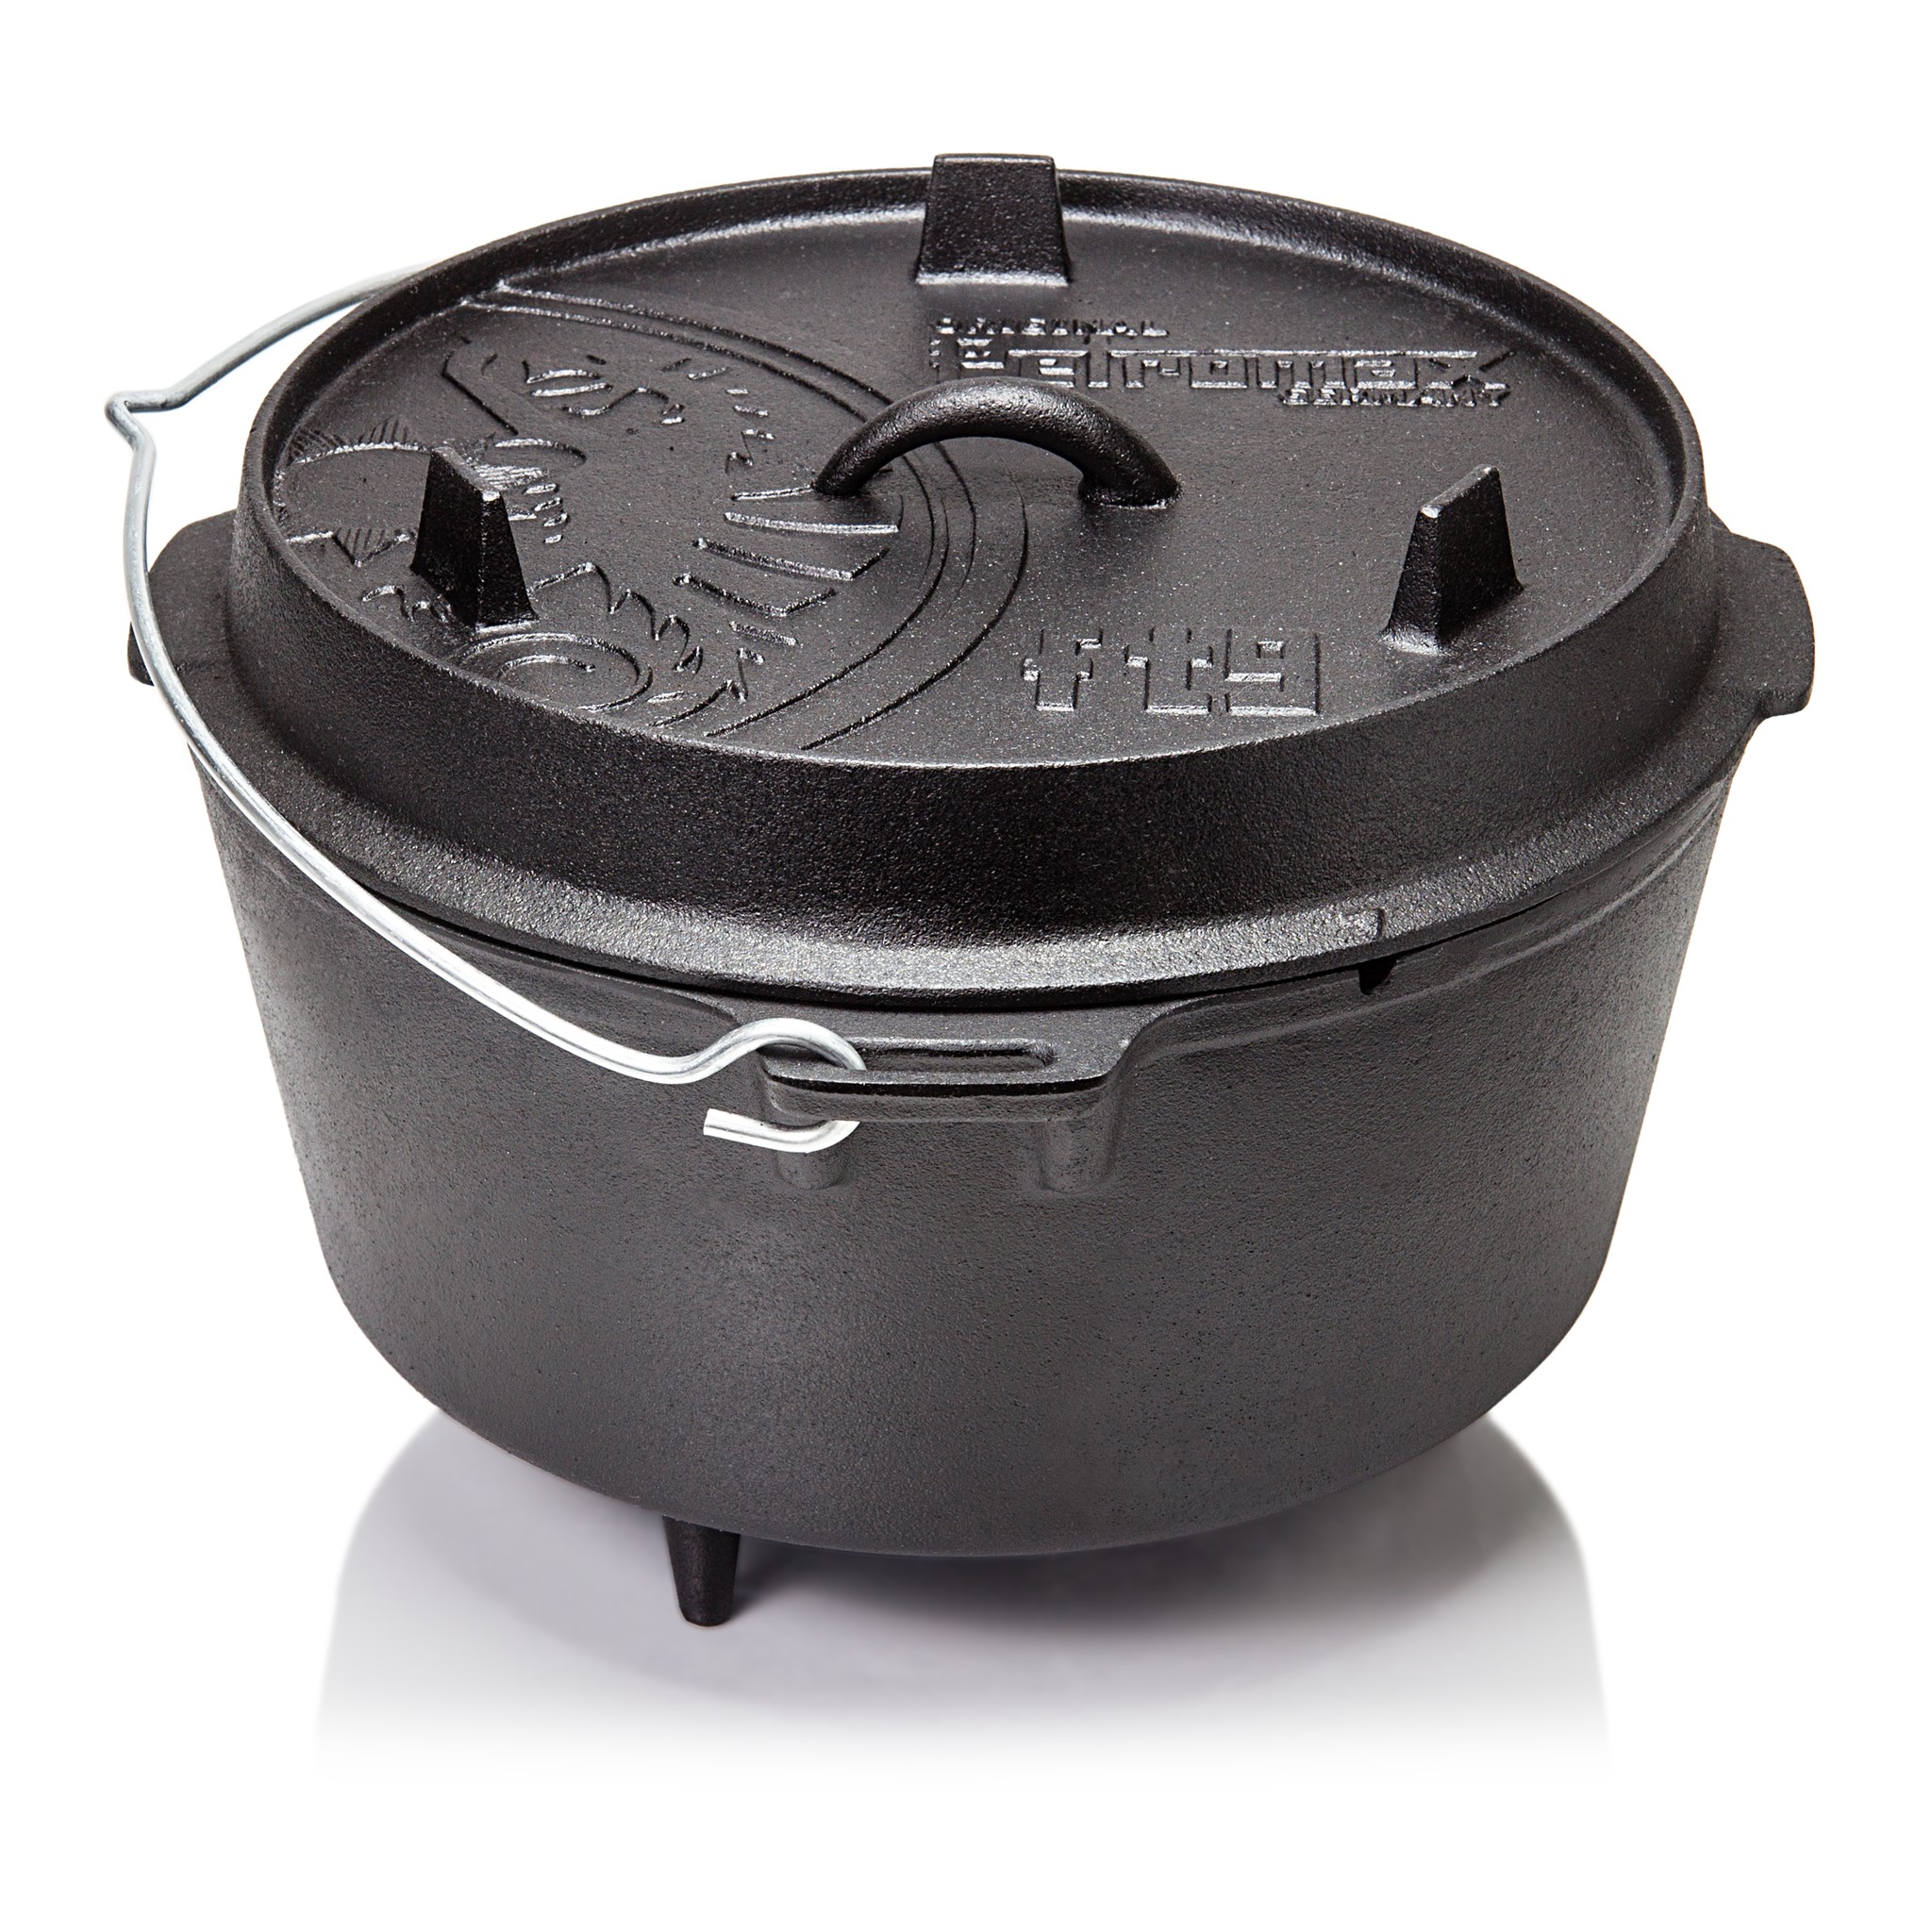 Picture of Petromax - Dutch Oven FT9 7.5 Liter (with Feet)